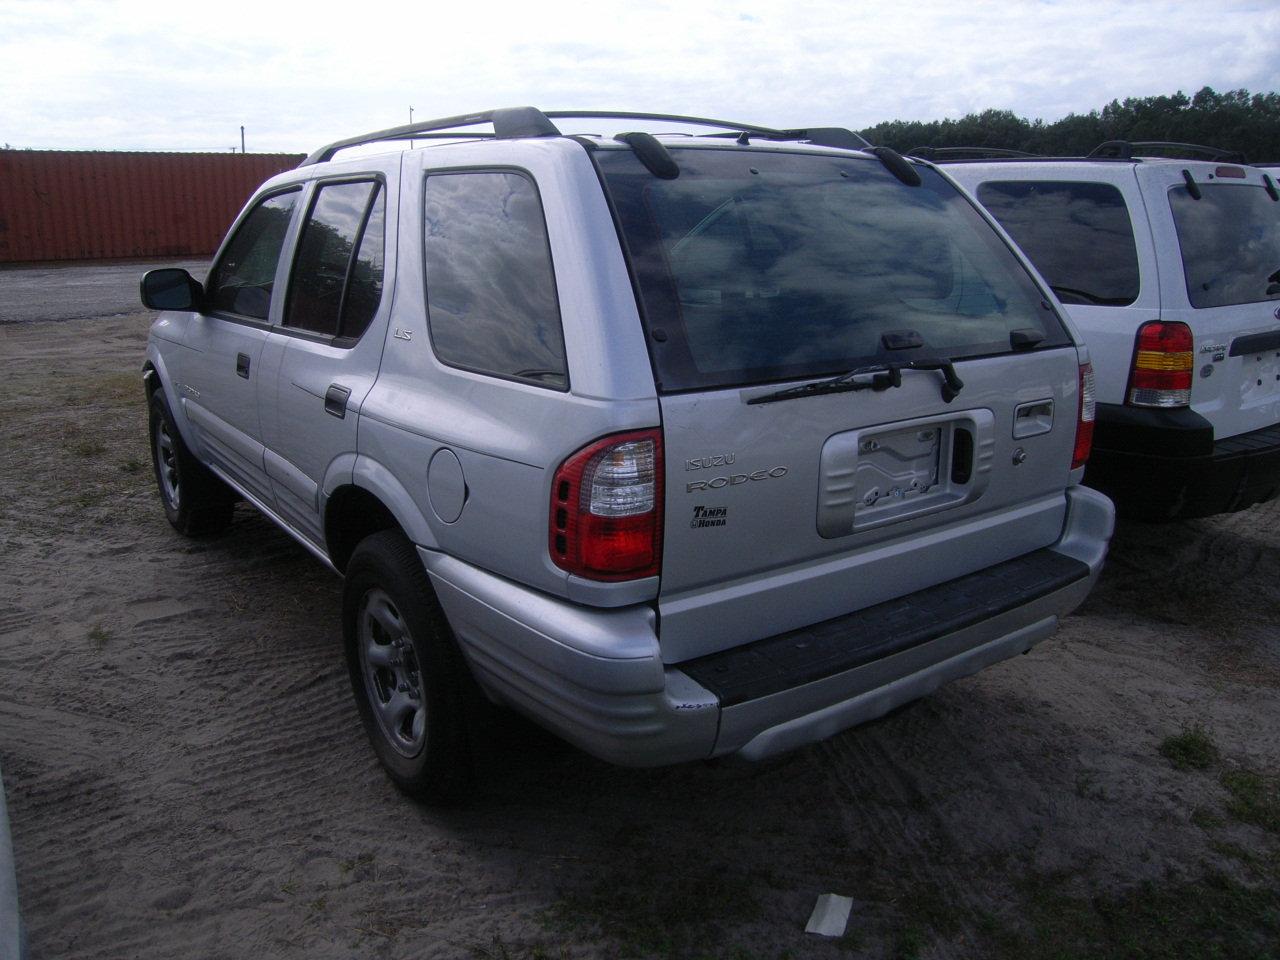 1-05116 (Cars-SUV 4D)  Seller:Private/Dealer 2001 ISUZ RODEO